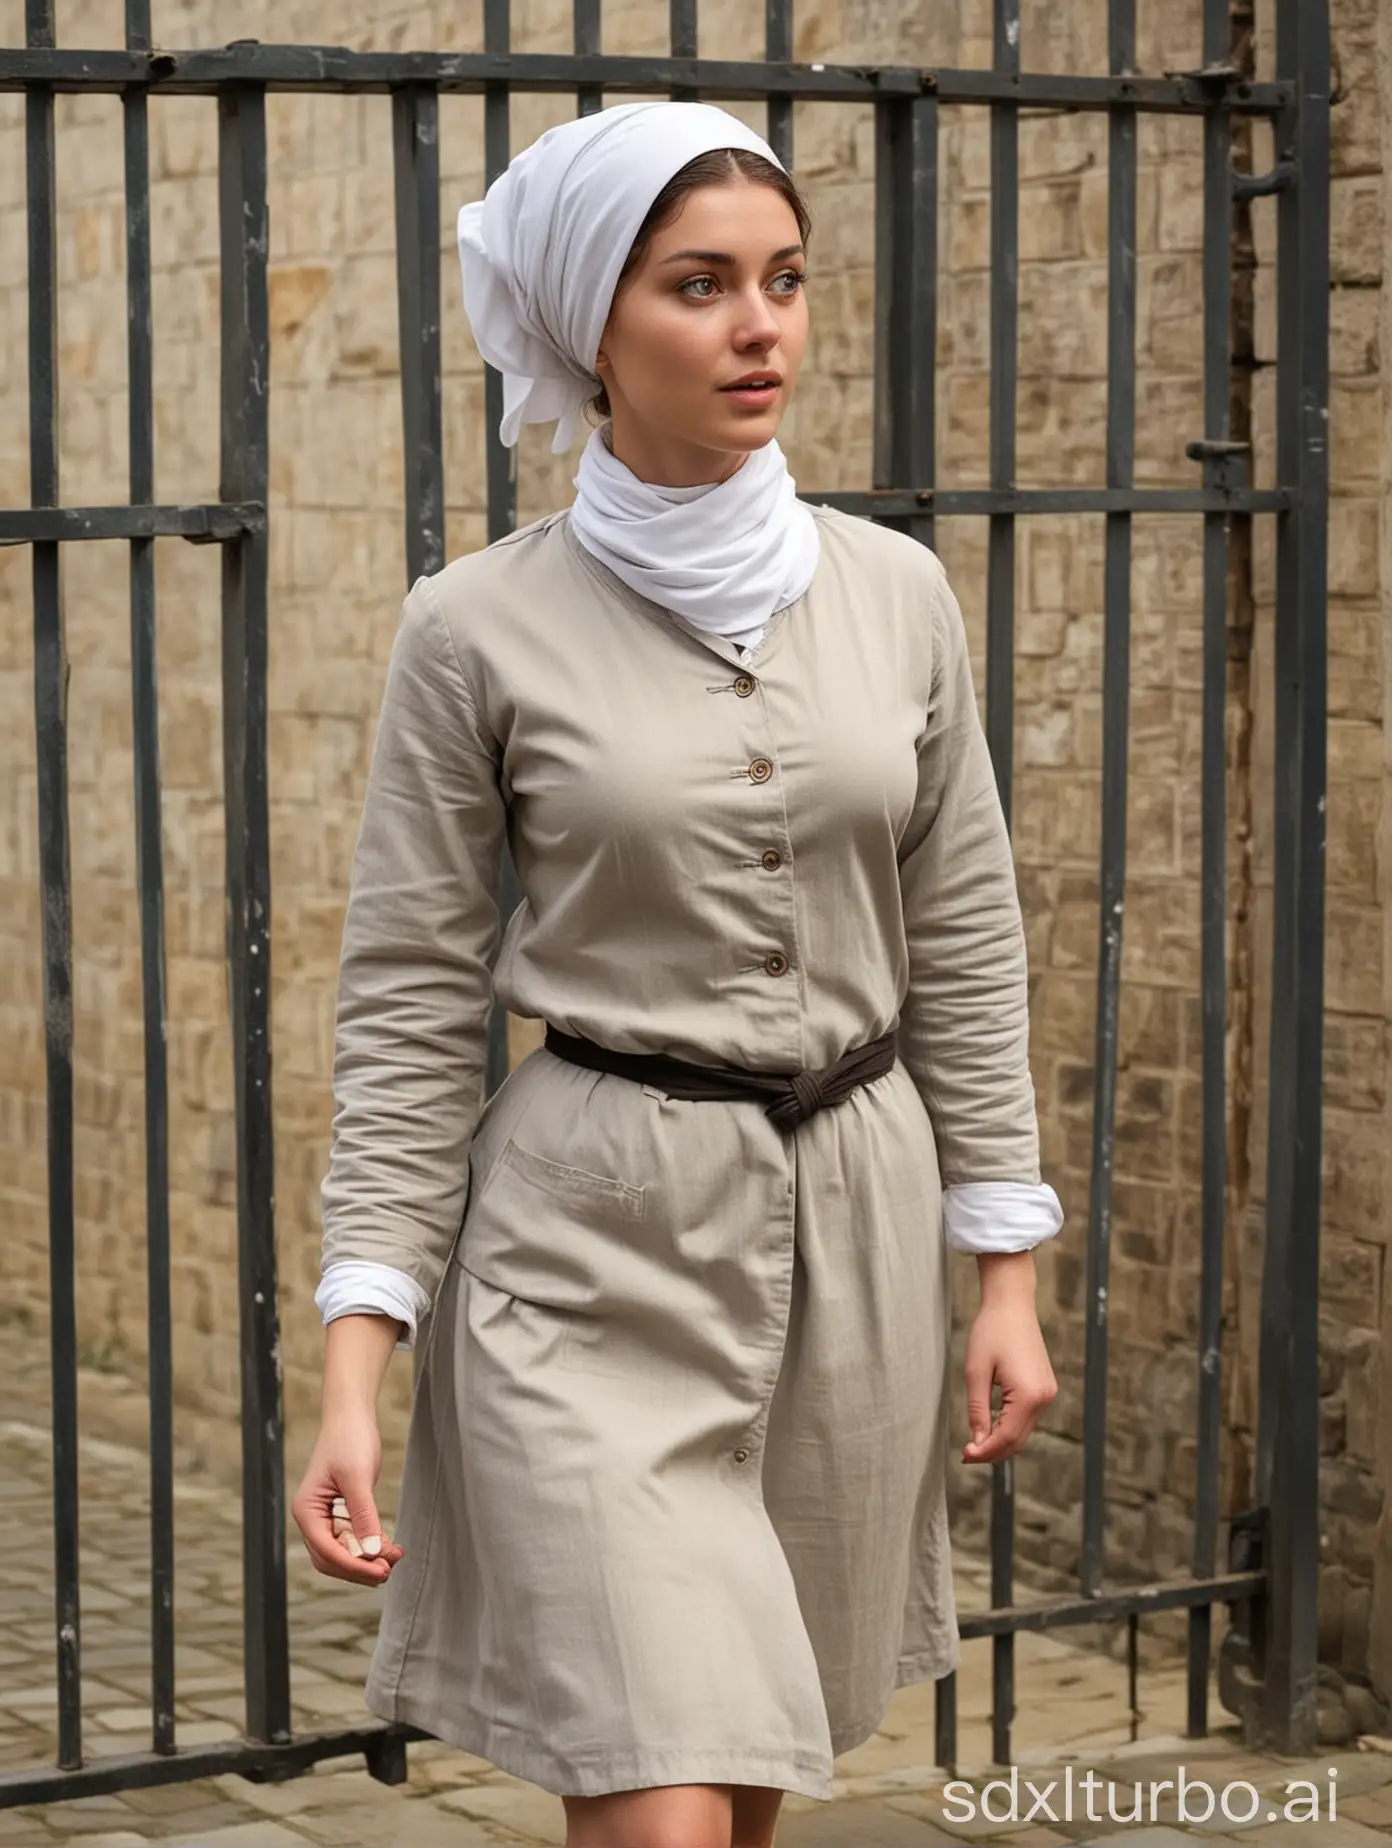 A young woman of not tall stature with quite full breasts stepped out of the prison gate with brisk steps, quickly turned around, and stood beside the guard captain. She wore a white blouse and white skirt inside, with a gray prison coat outside. She wore linen socks on her feet, with prisoners' cotton shoes outside the socks, and tied a white headscarf on her head, deliberately letting a few curly black hairs slip out from the scarf. The entire face of this woman showed the special pale color of those long-term imprisoned, reminiscent of the tender sprouts of potatoes in a cellar. Her short and wide hands and the full white neck exposed from the loose collar of the prison coat were of the same color. On that face, especially framed by the pale and colorless complexion, her eyes appeared very dark, very bright, slightly swollen, but very lively, with one eye slightly squinting. She stood upright, with her full breasts raised.